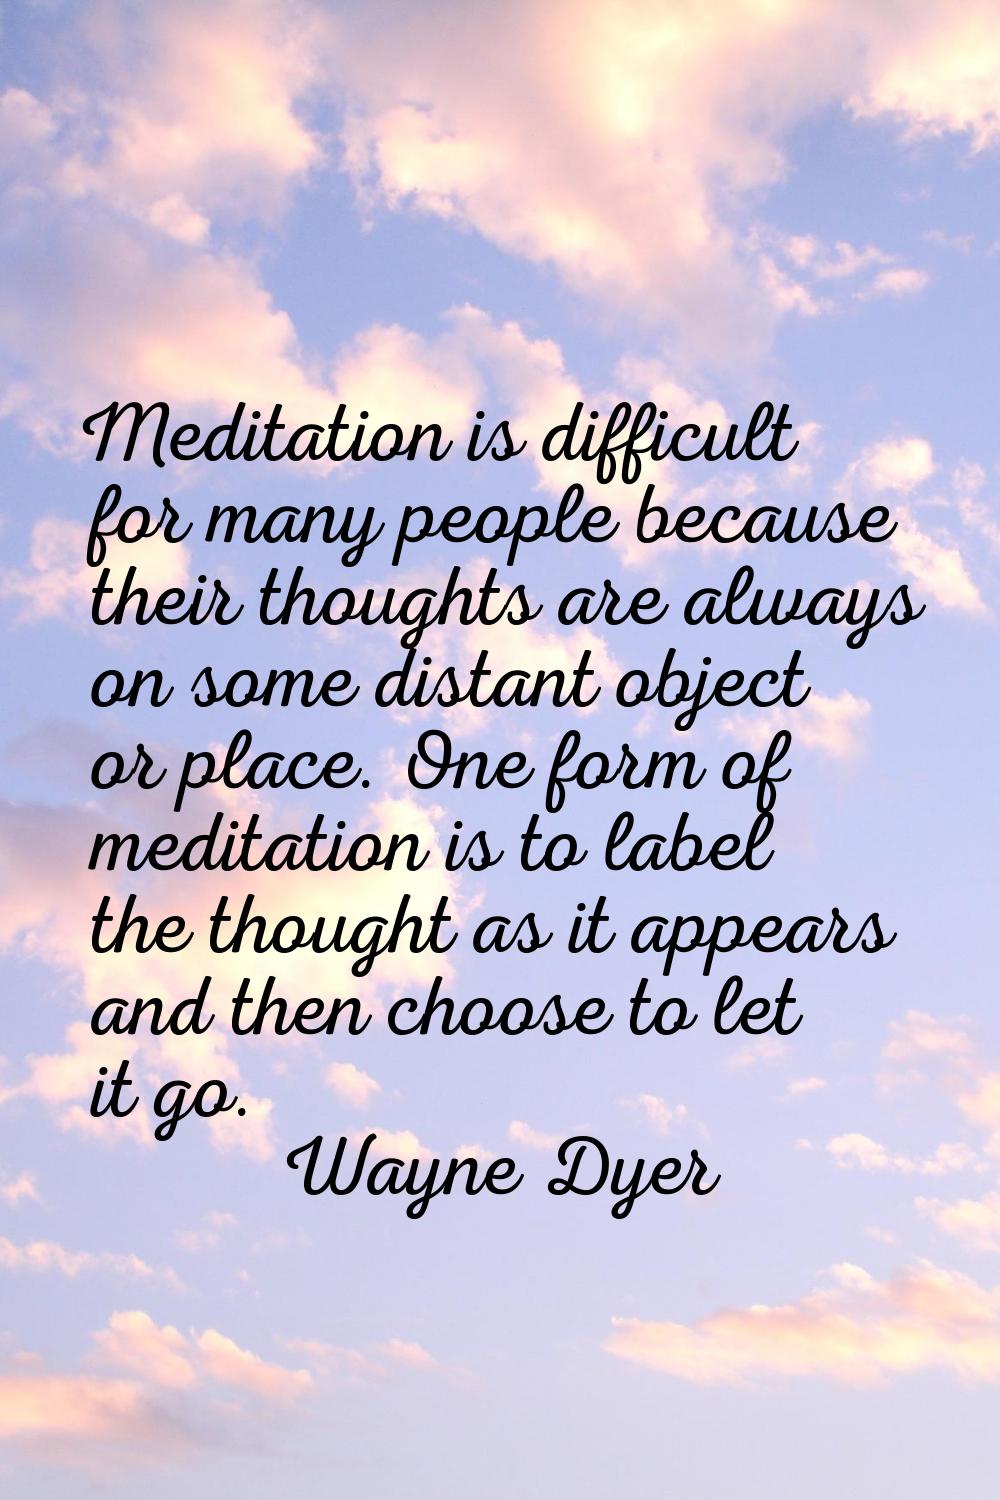 Meditation is difficult for many people because their thoughts are always on some distant object or